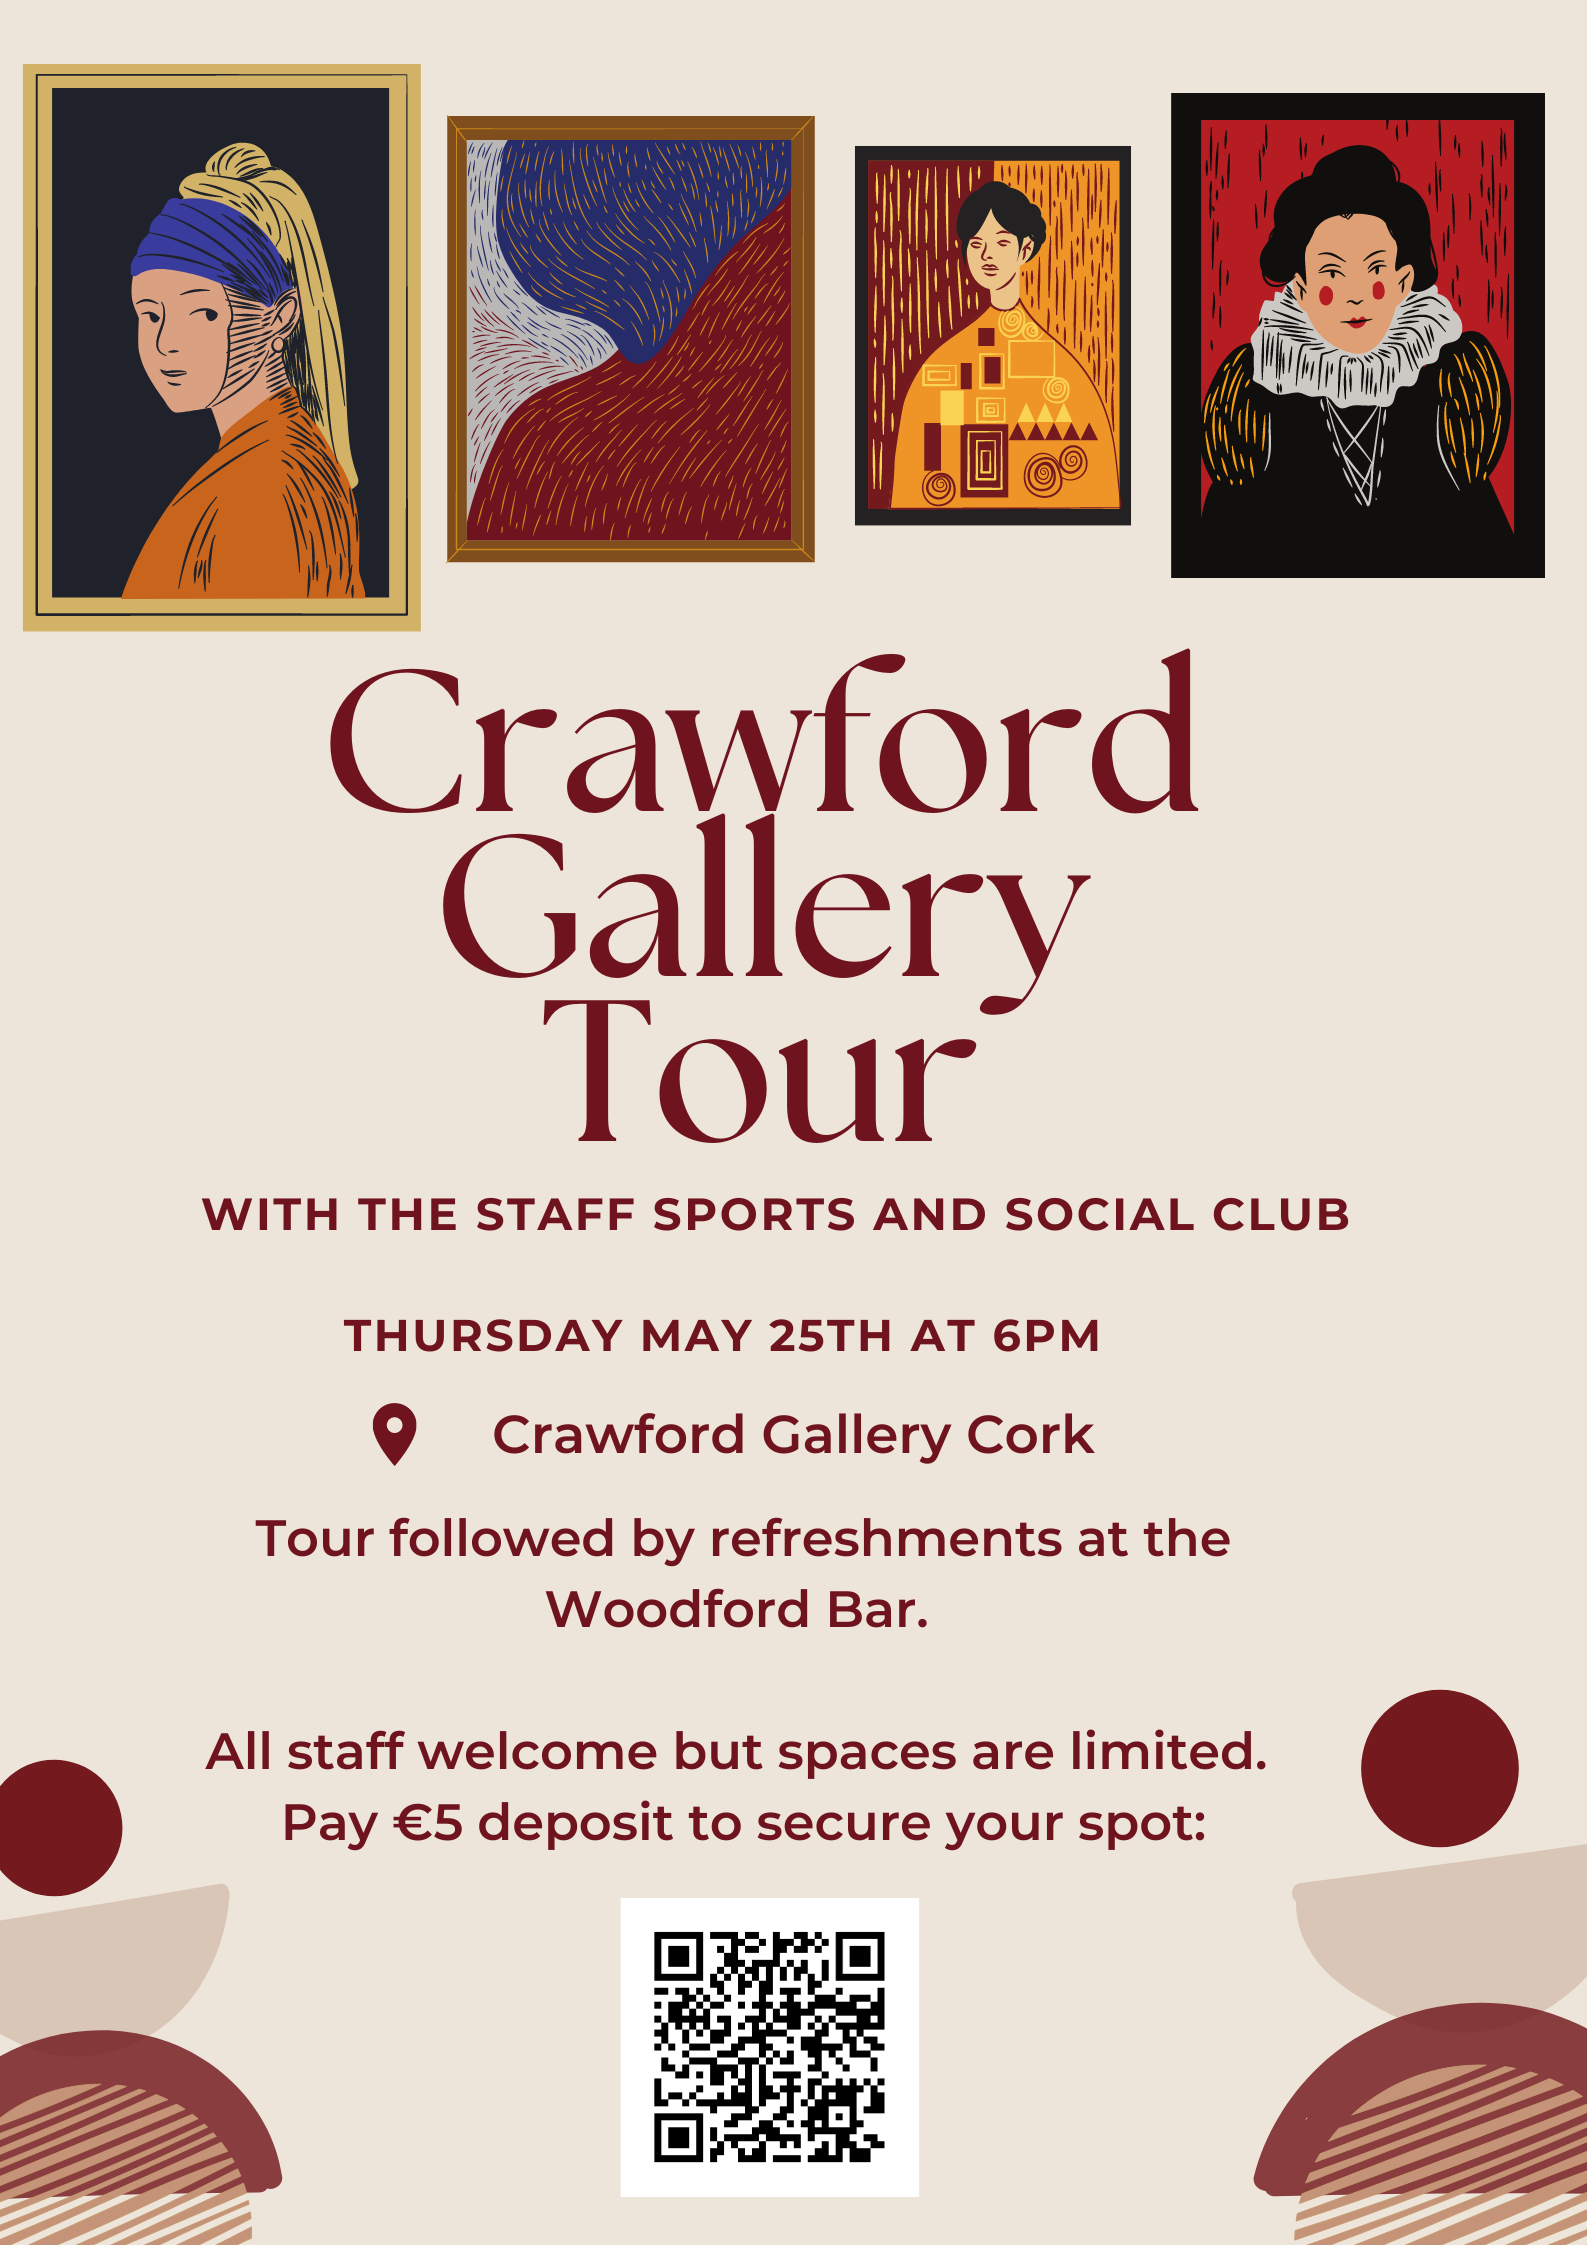 Advertisement for Crawford Gallery Tour